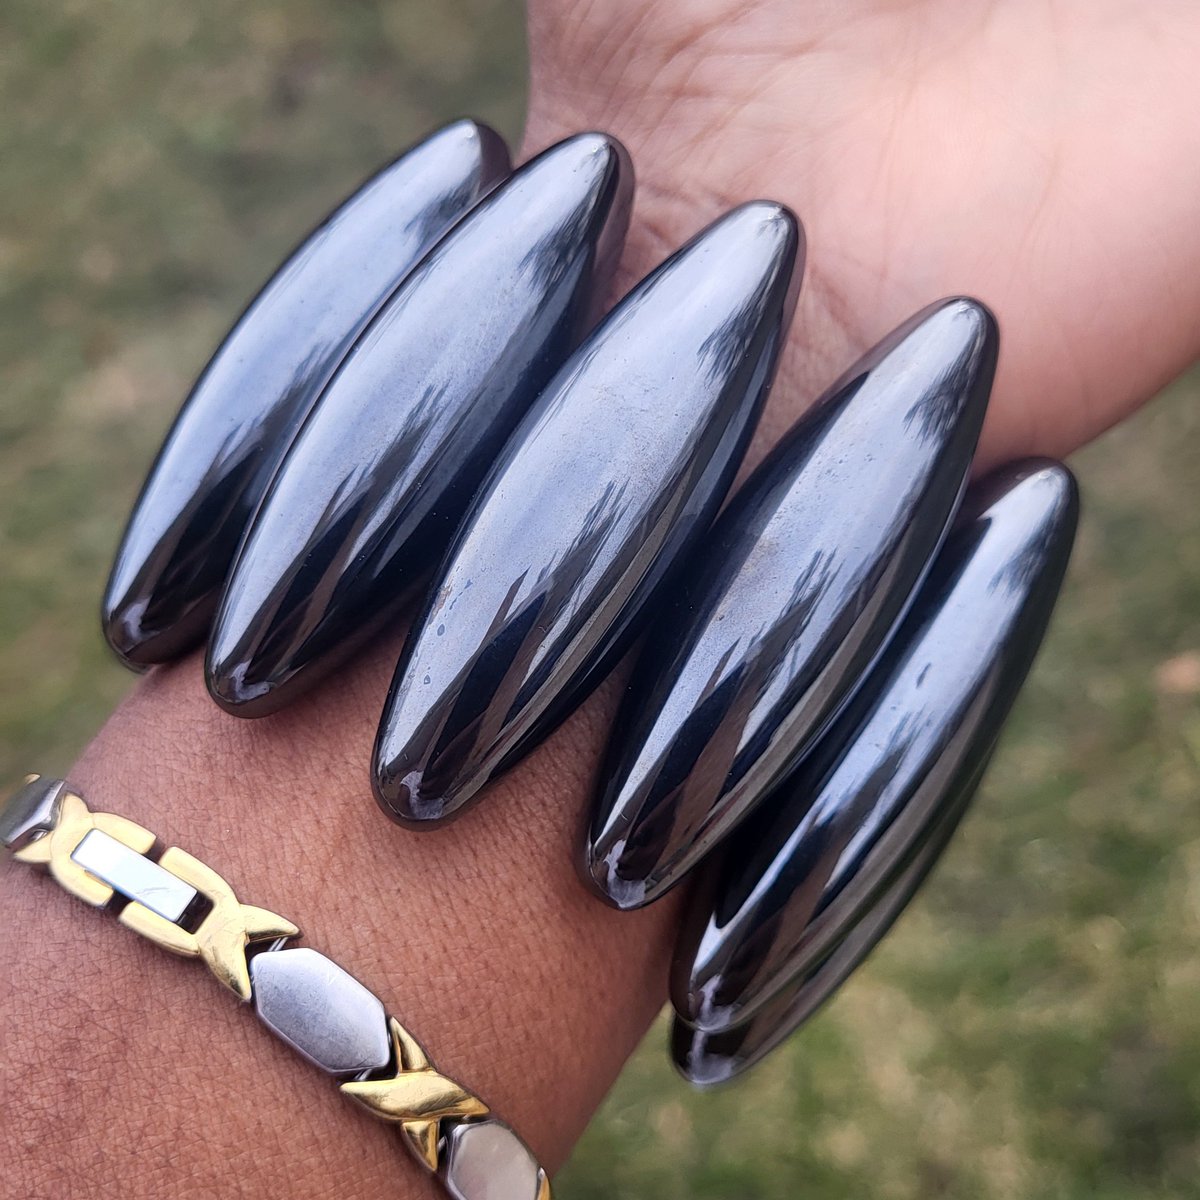 The Earth's frequency is changing. Place a protective shield around you by using Hematite Magnets. Rub them on your body, place them around your home. Use them daily & watch as your frequency begins to rise.
BACK IN STOCK!⚡️
bit.ly/hememags